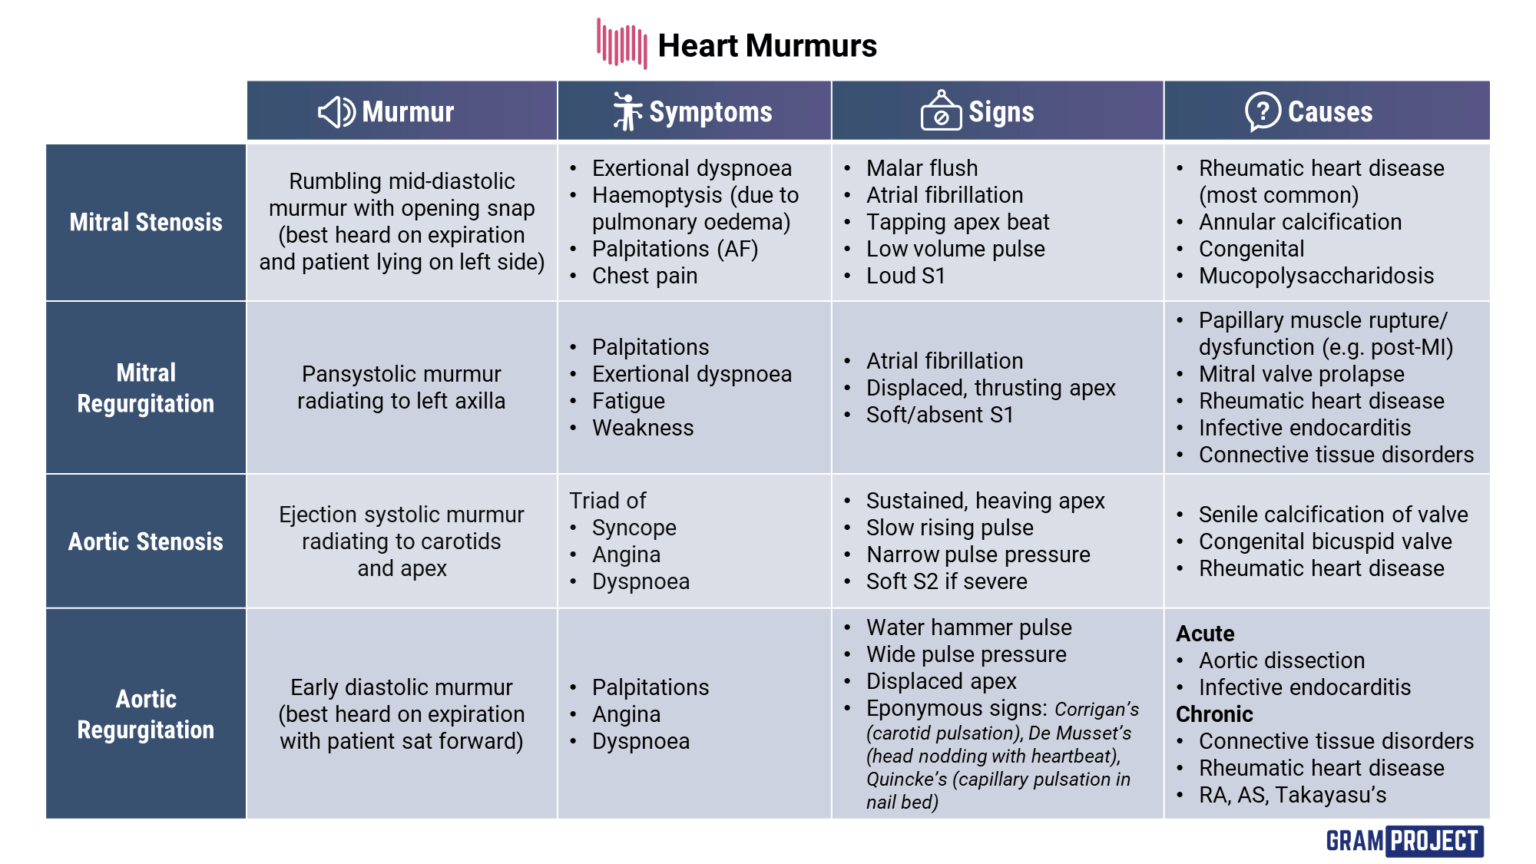 Summary table of murmurs, signs and symptoms of mitral and aortic valve disease